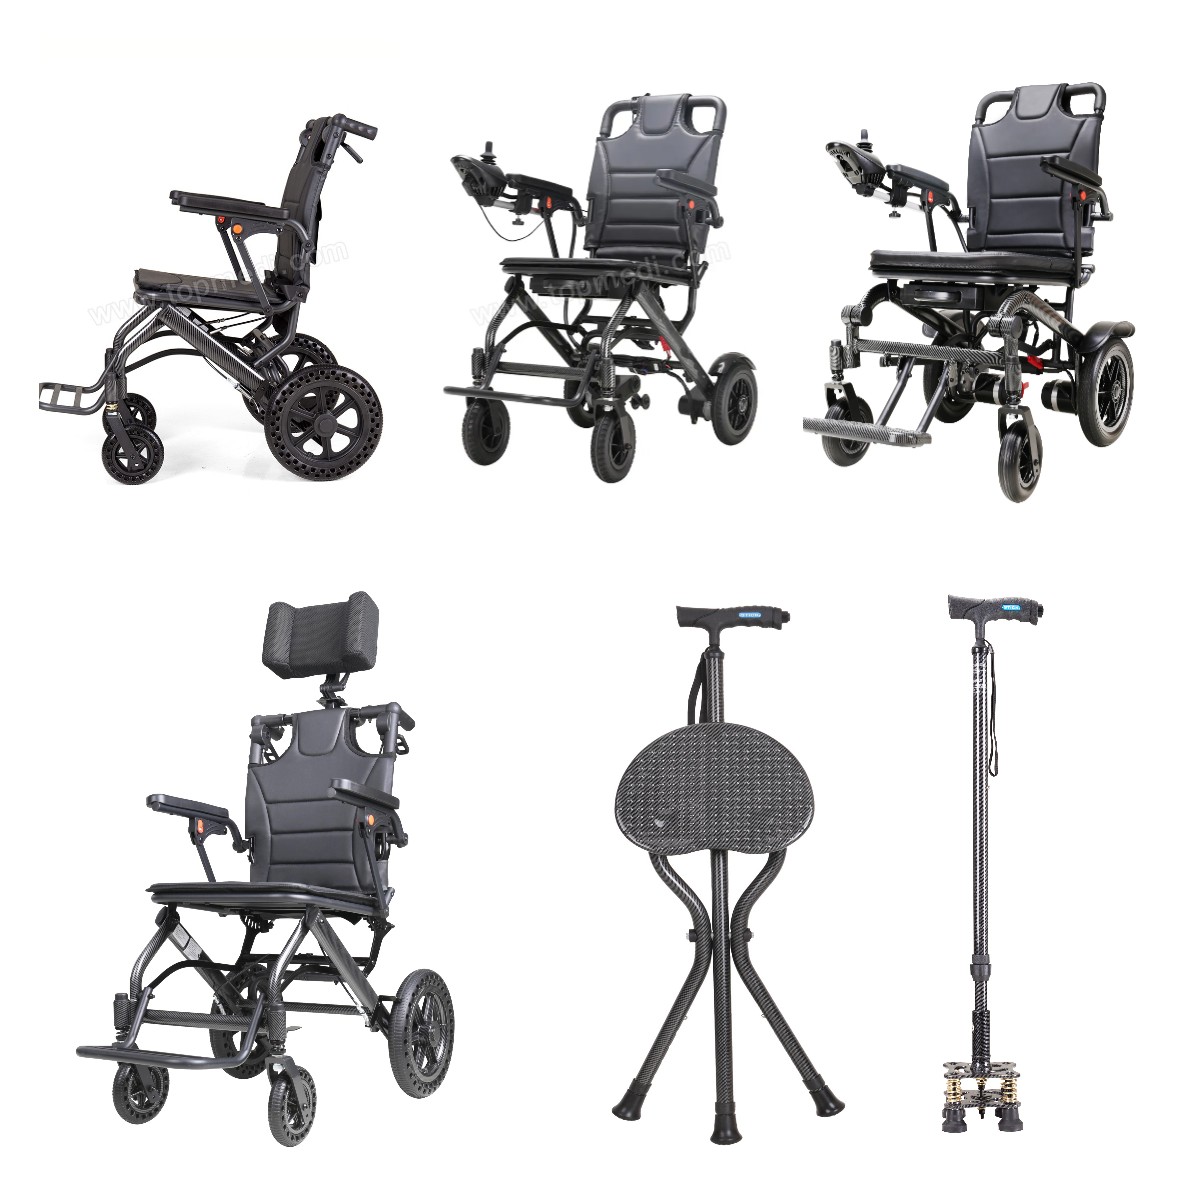 Introducing our latest carbon fiber transfer process – transforming the wheelchair industry